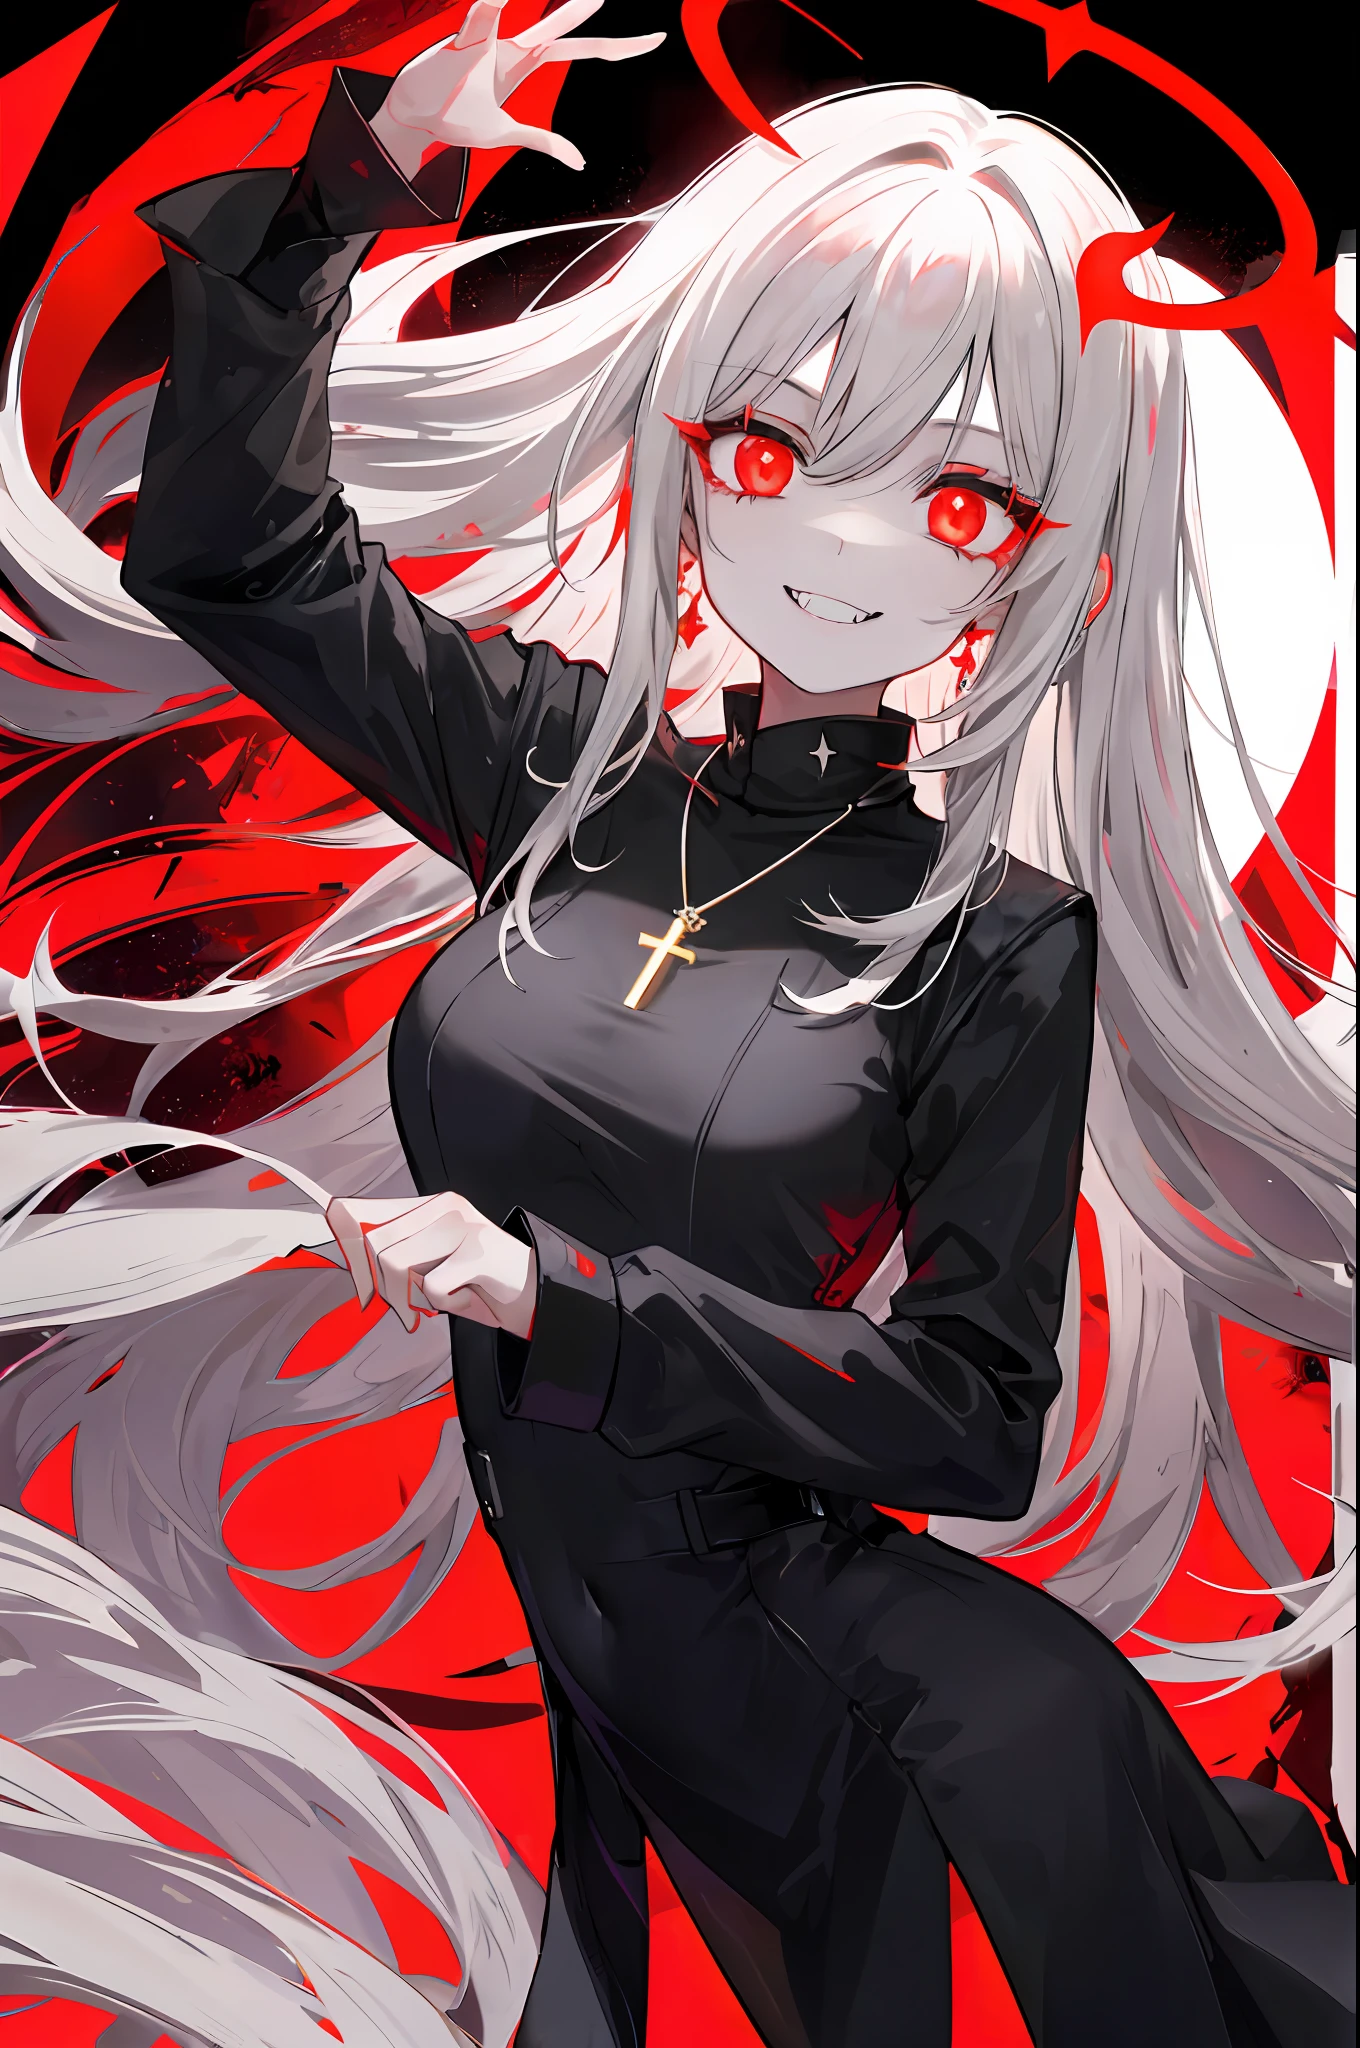 1girl, (scary), angel, gorgeos, (red halo), dark, glowing eyes, red eyes, angel wings, glowing pendant, holy, sensual, black tunic, feathers, confident, smile, expressive eyes, collofull eyes, contrast, shadows, masterpiece, digital art, glowing eyes, intimidating, corrupted, demonic, red moon, abstract, feelings